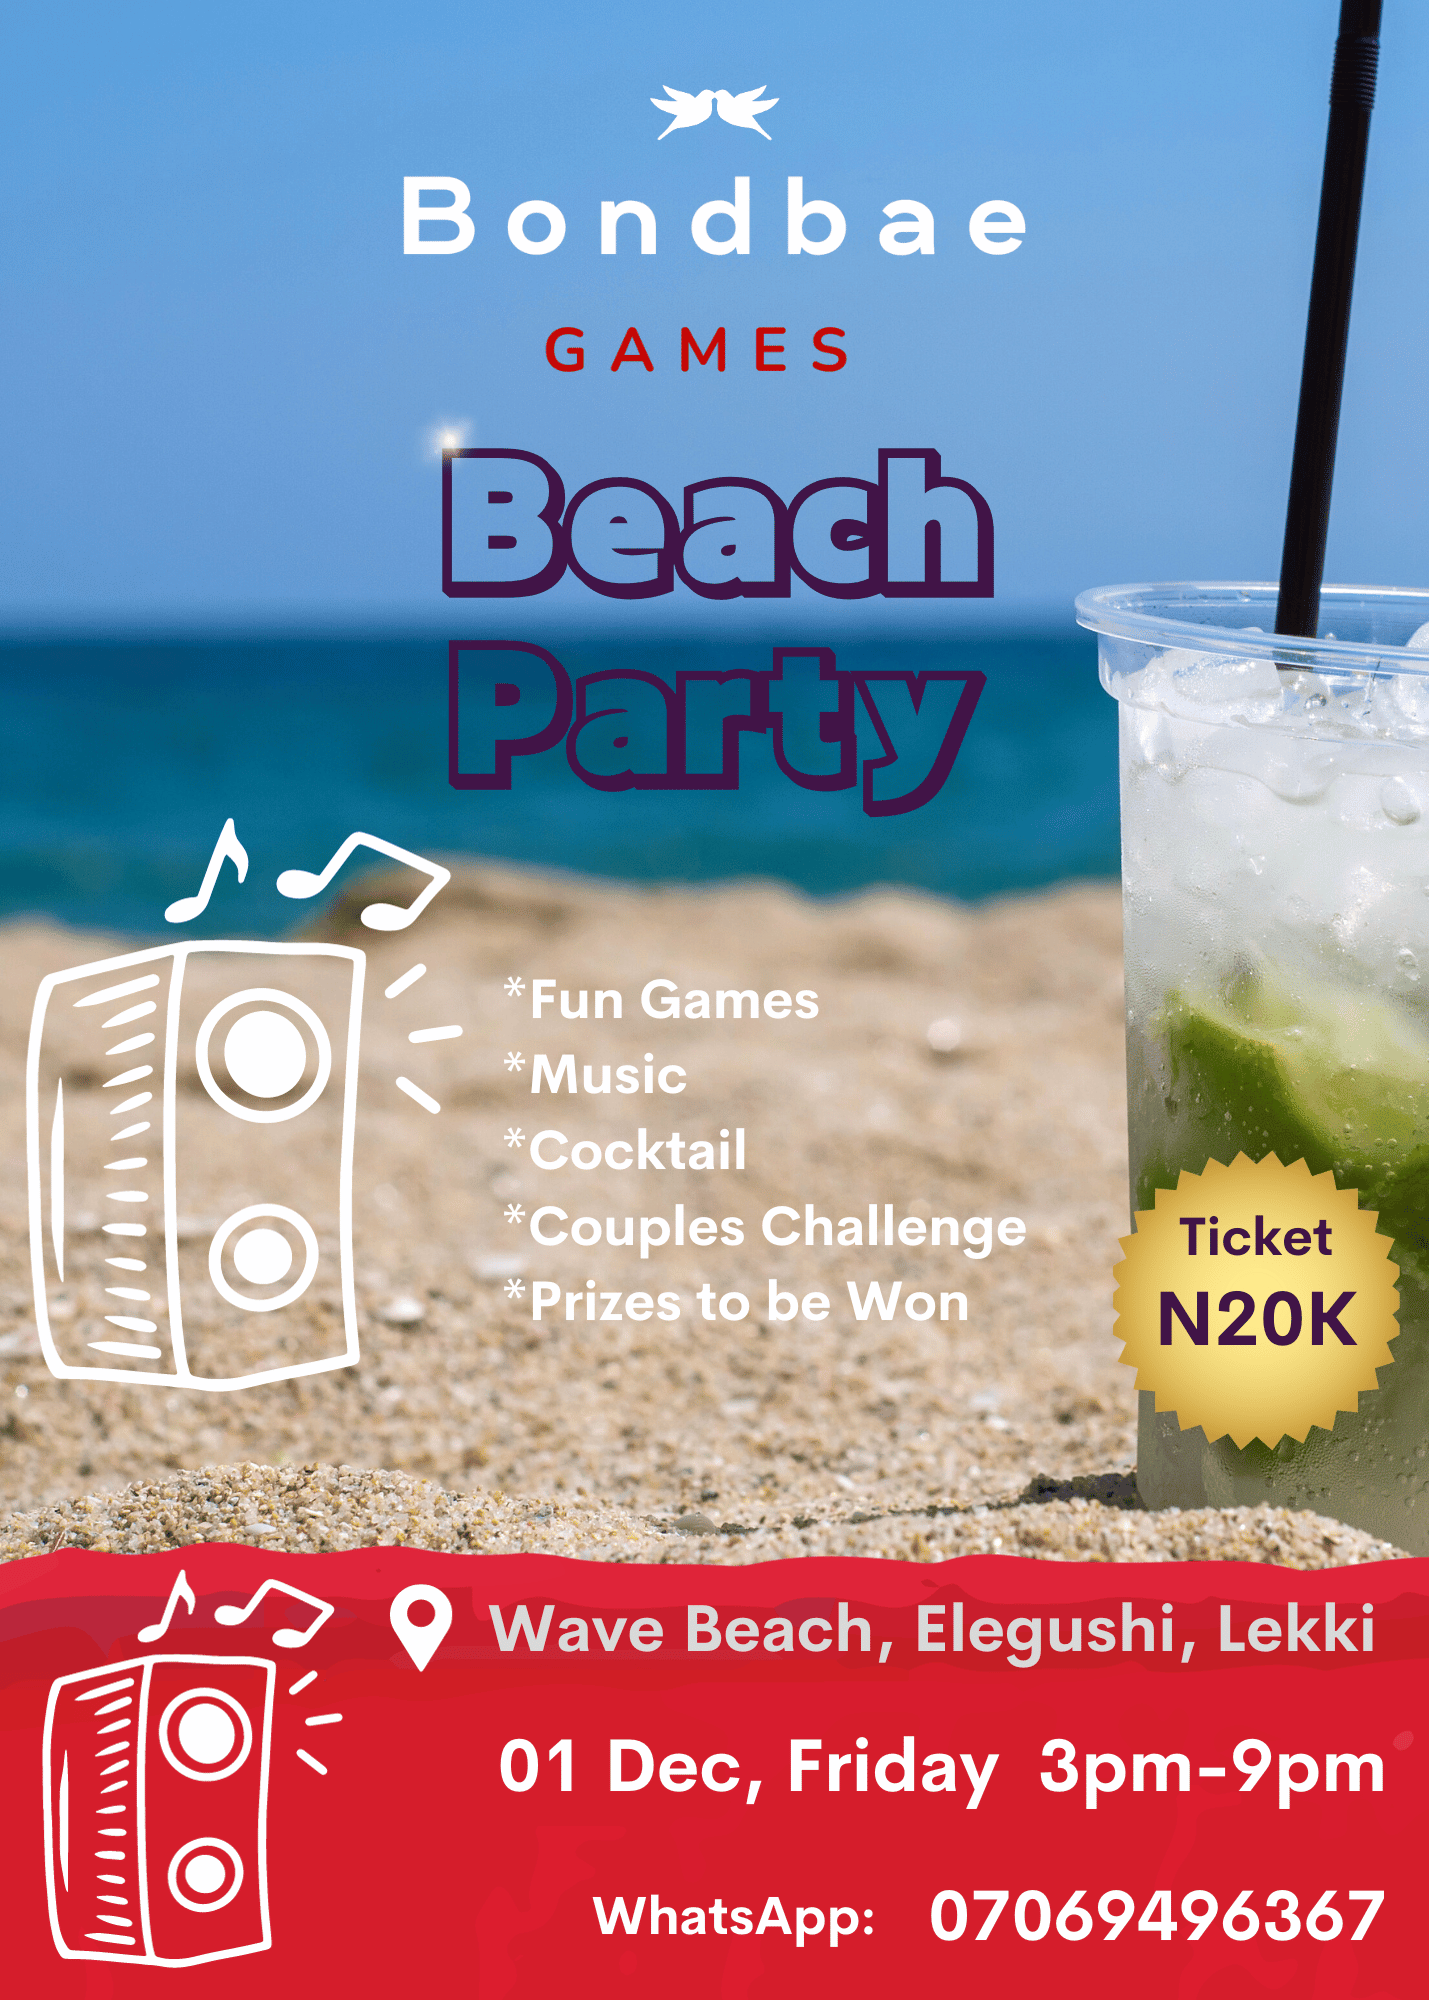 Bondbae Games - Beach Party Post free event in Nigeria using tickethub.ng, buy and sell tickets to event